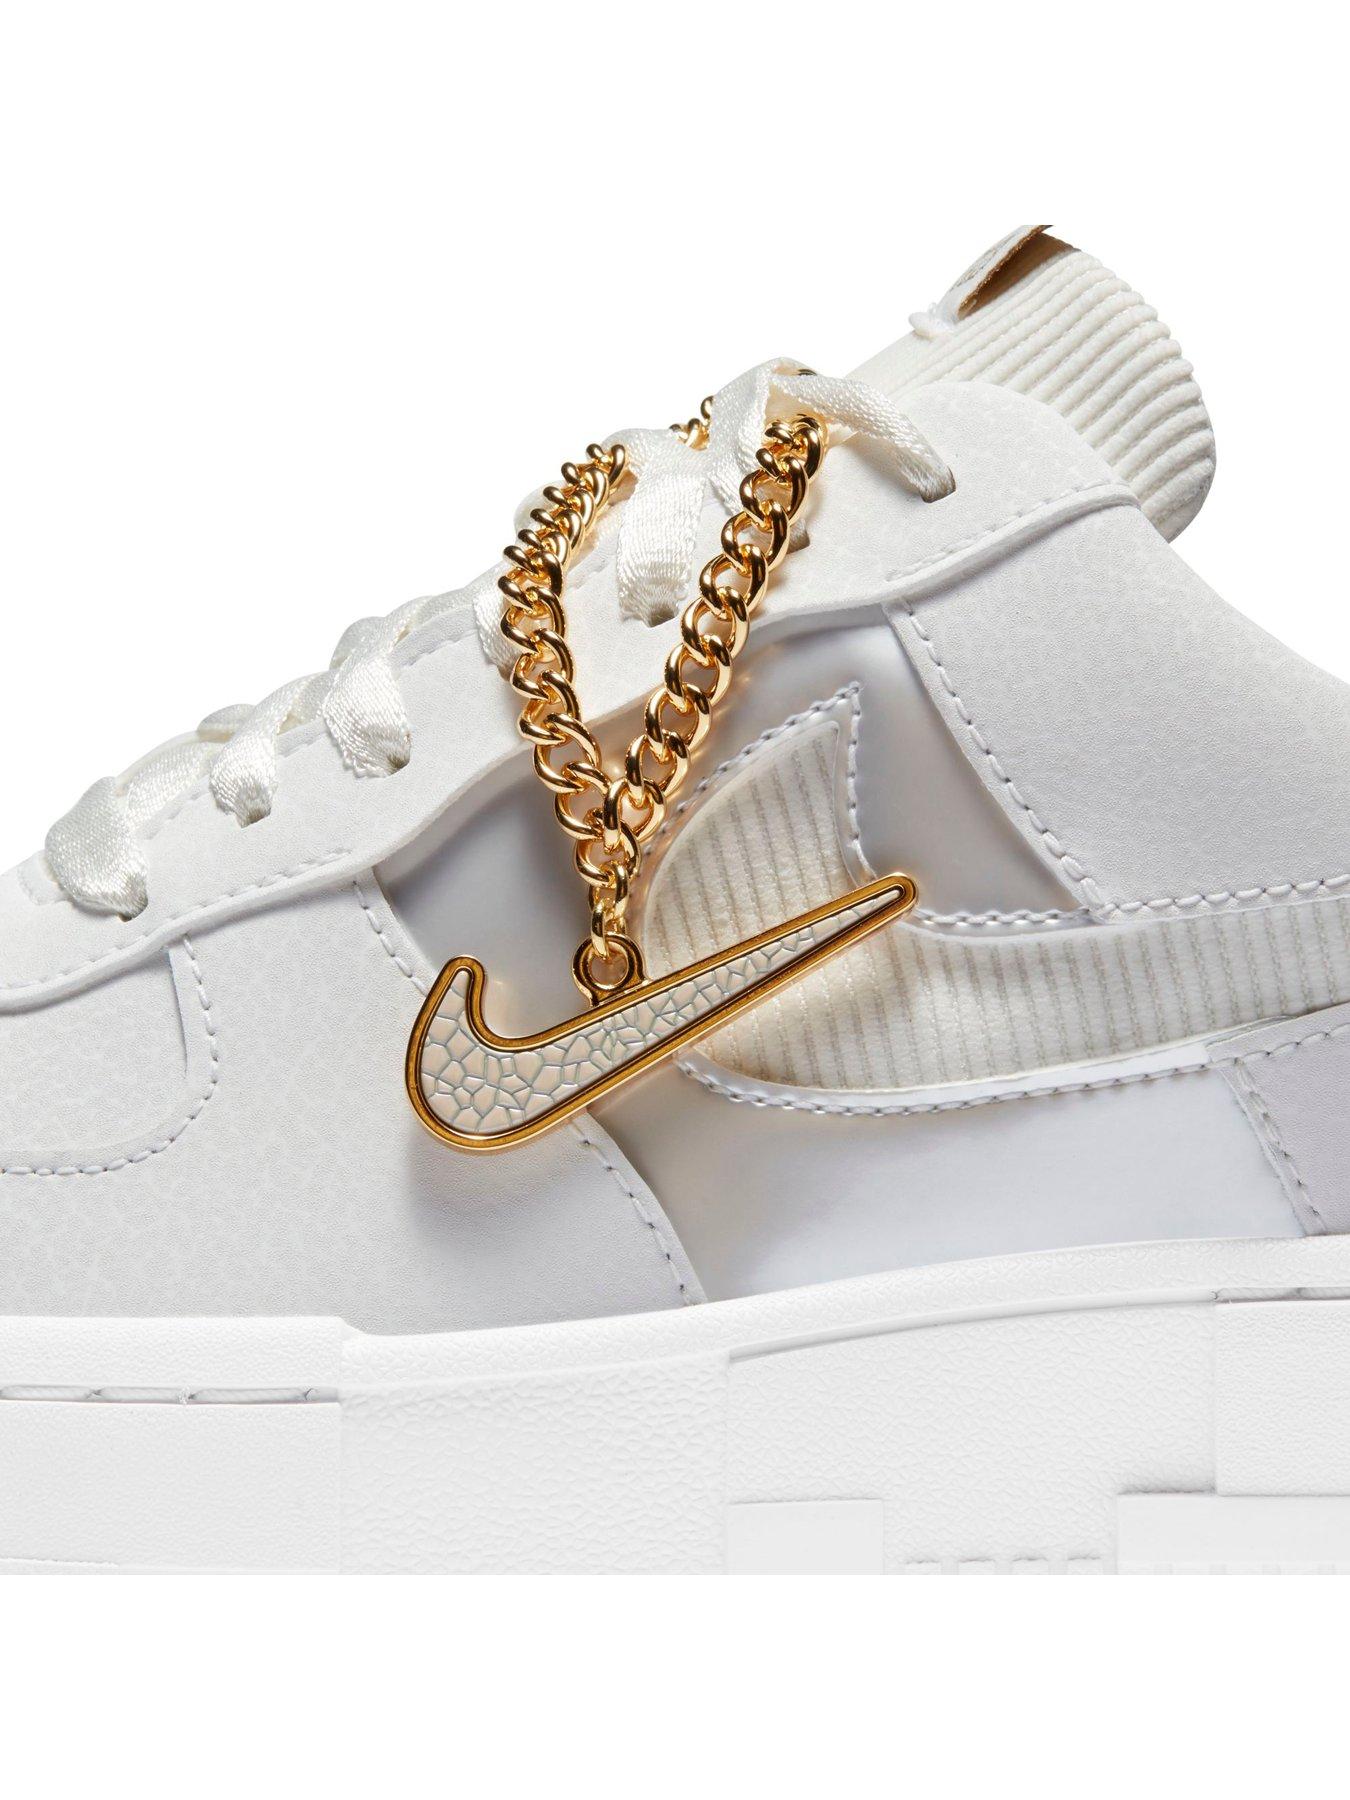 nike white gold trainers